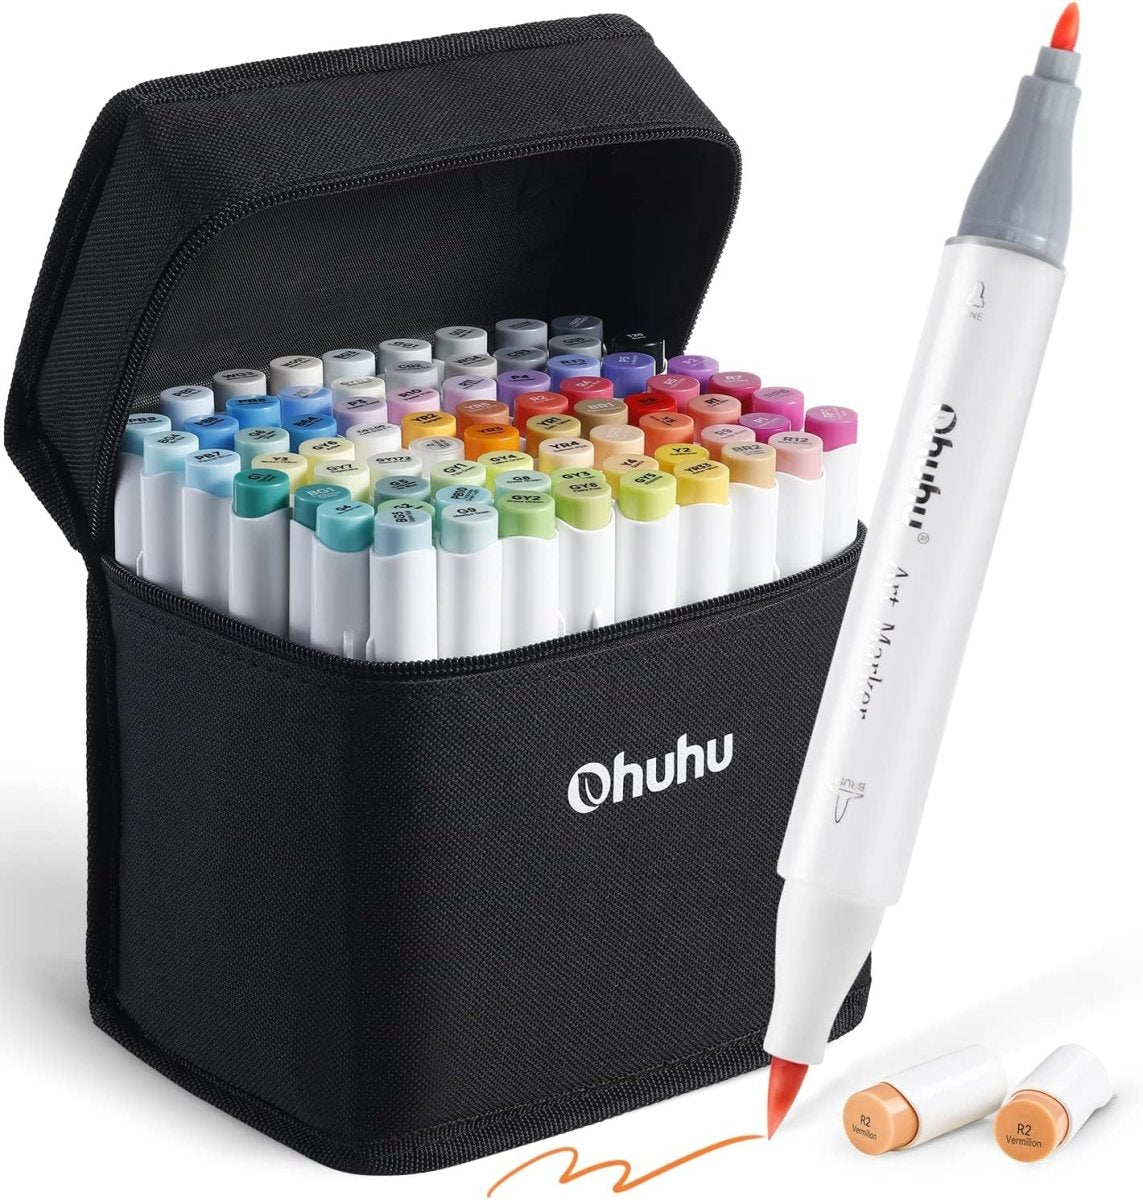 Ohuhu Maui Dual Tips Water Based Art Markers - 36 Skin Tone Color Set - Brush and Fineliner 